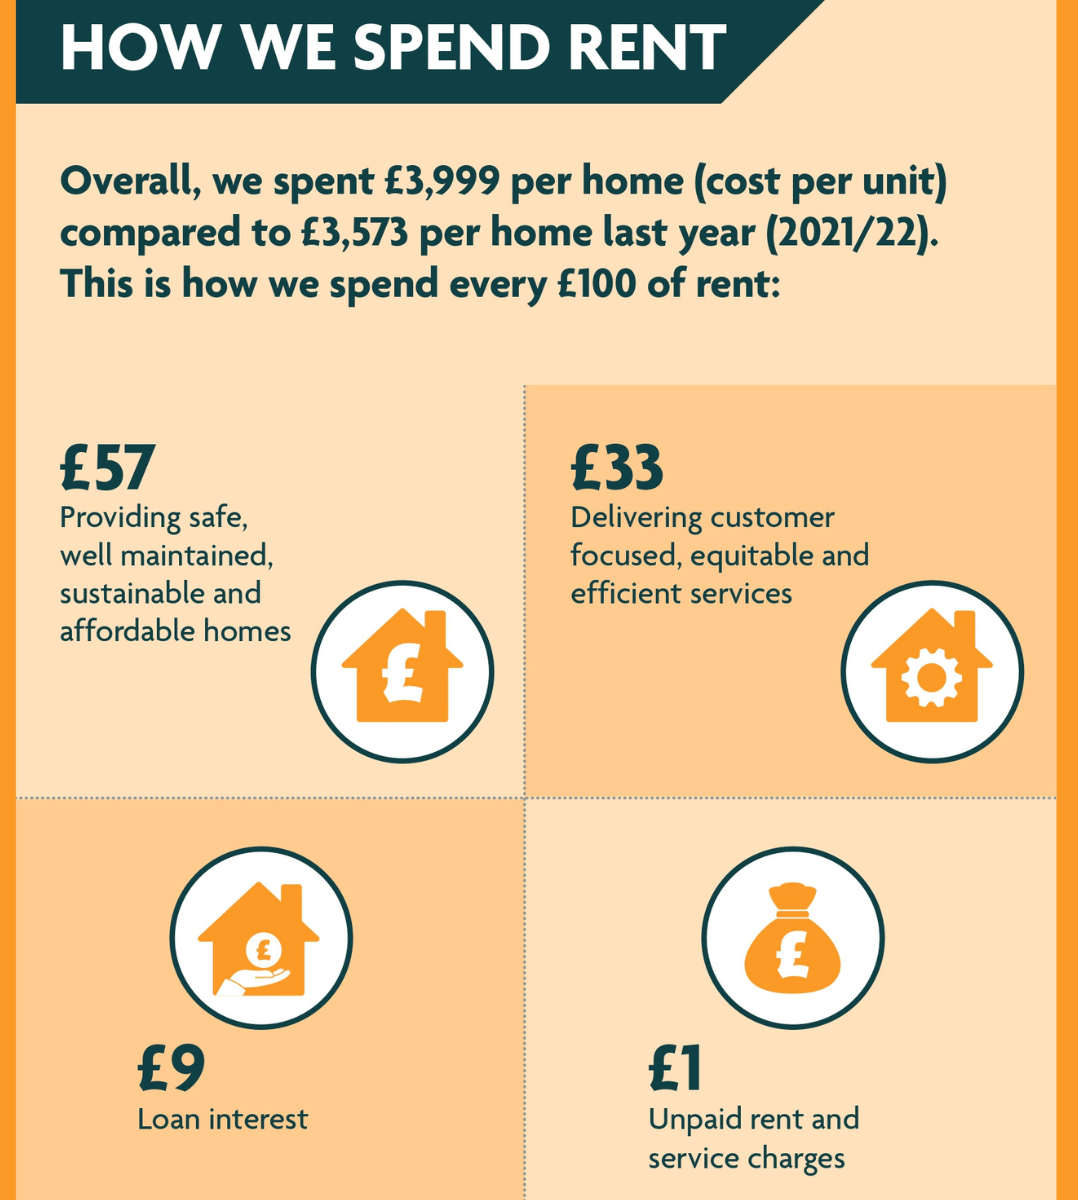 Overall, we spent £3,999 per home (cost per unit) compared to £3,573 per home last year (2021/22). This is how we spend every £100 of rent: £57 Providing safe, well maintained, sustainable and affordable homes. £33 Delivering customer focused, equitable and efficient services £9 Loan interest £1 Unpaid rent and service charges